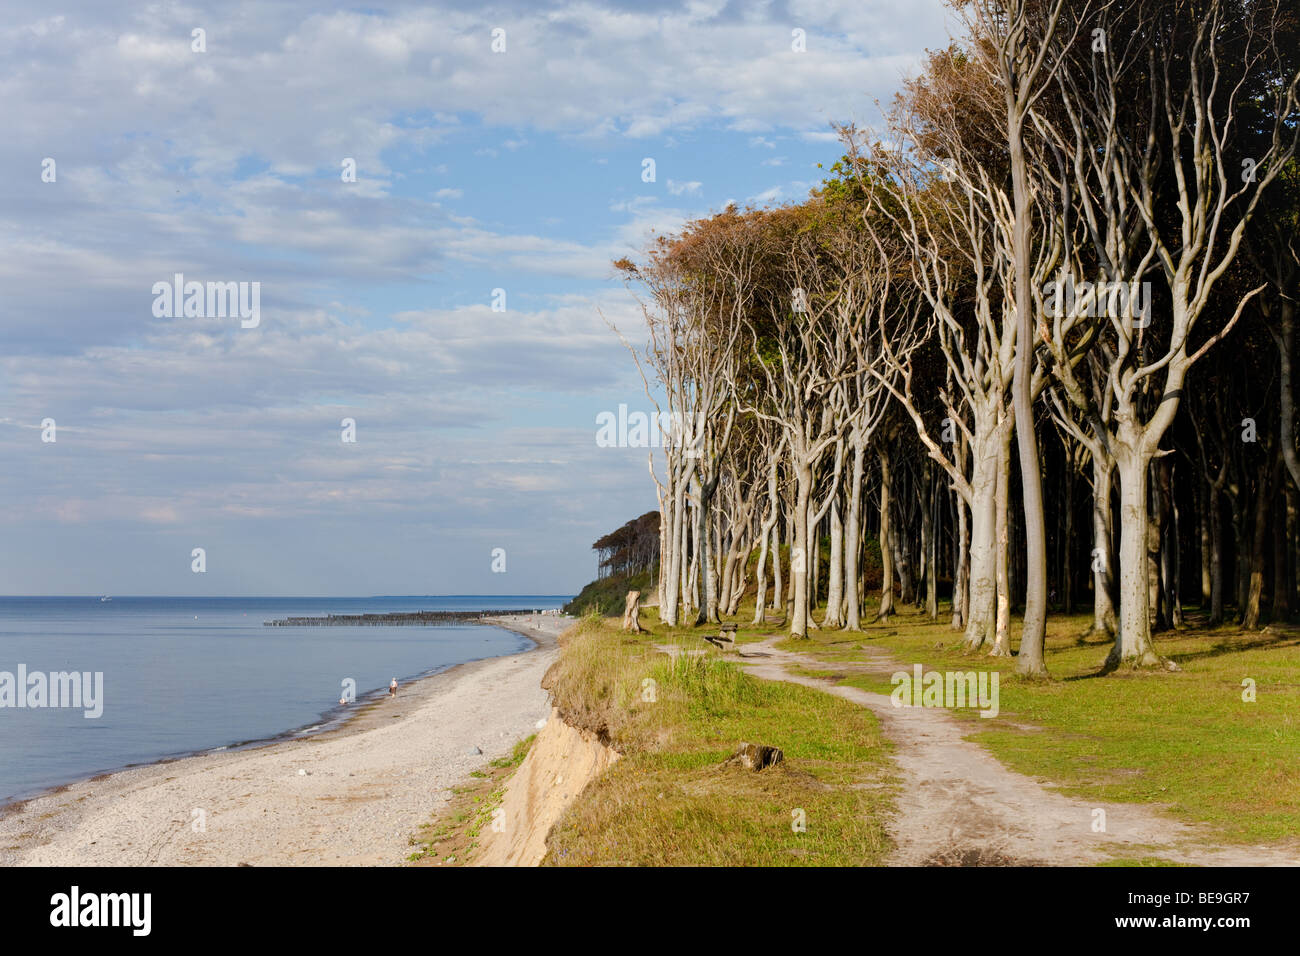 The 'Ghost forest' of Nienhagen, Germany, on the coast of Baltic sea Stock Photo